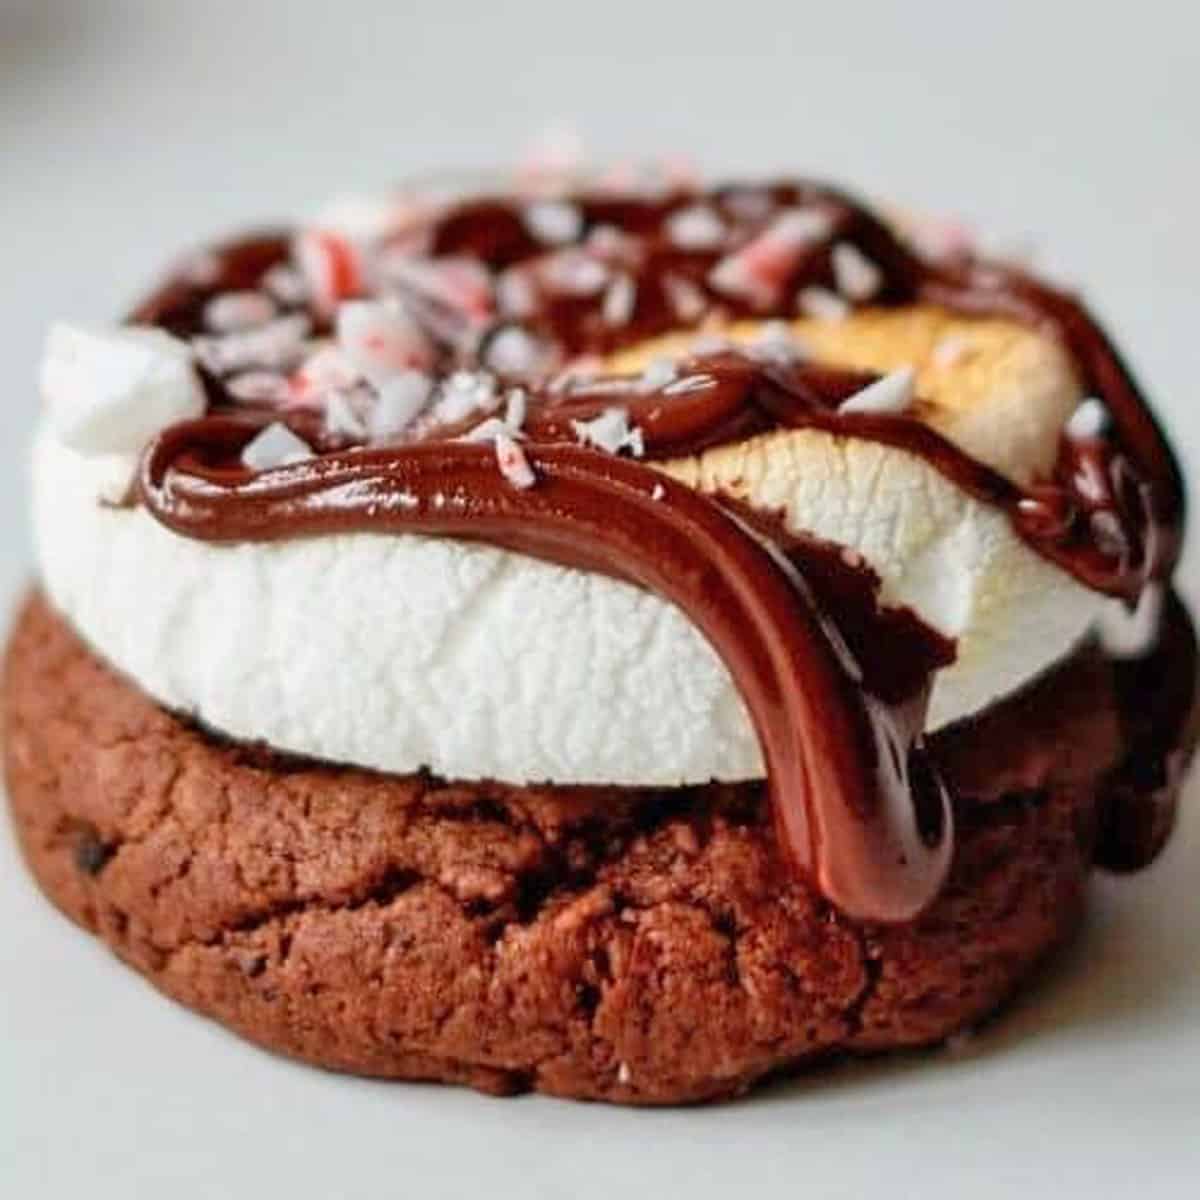 An ooey chocolate cookie topped with a marshmallow and chocolate dripping off the top.